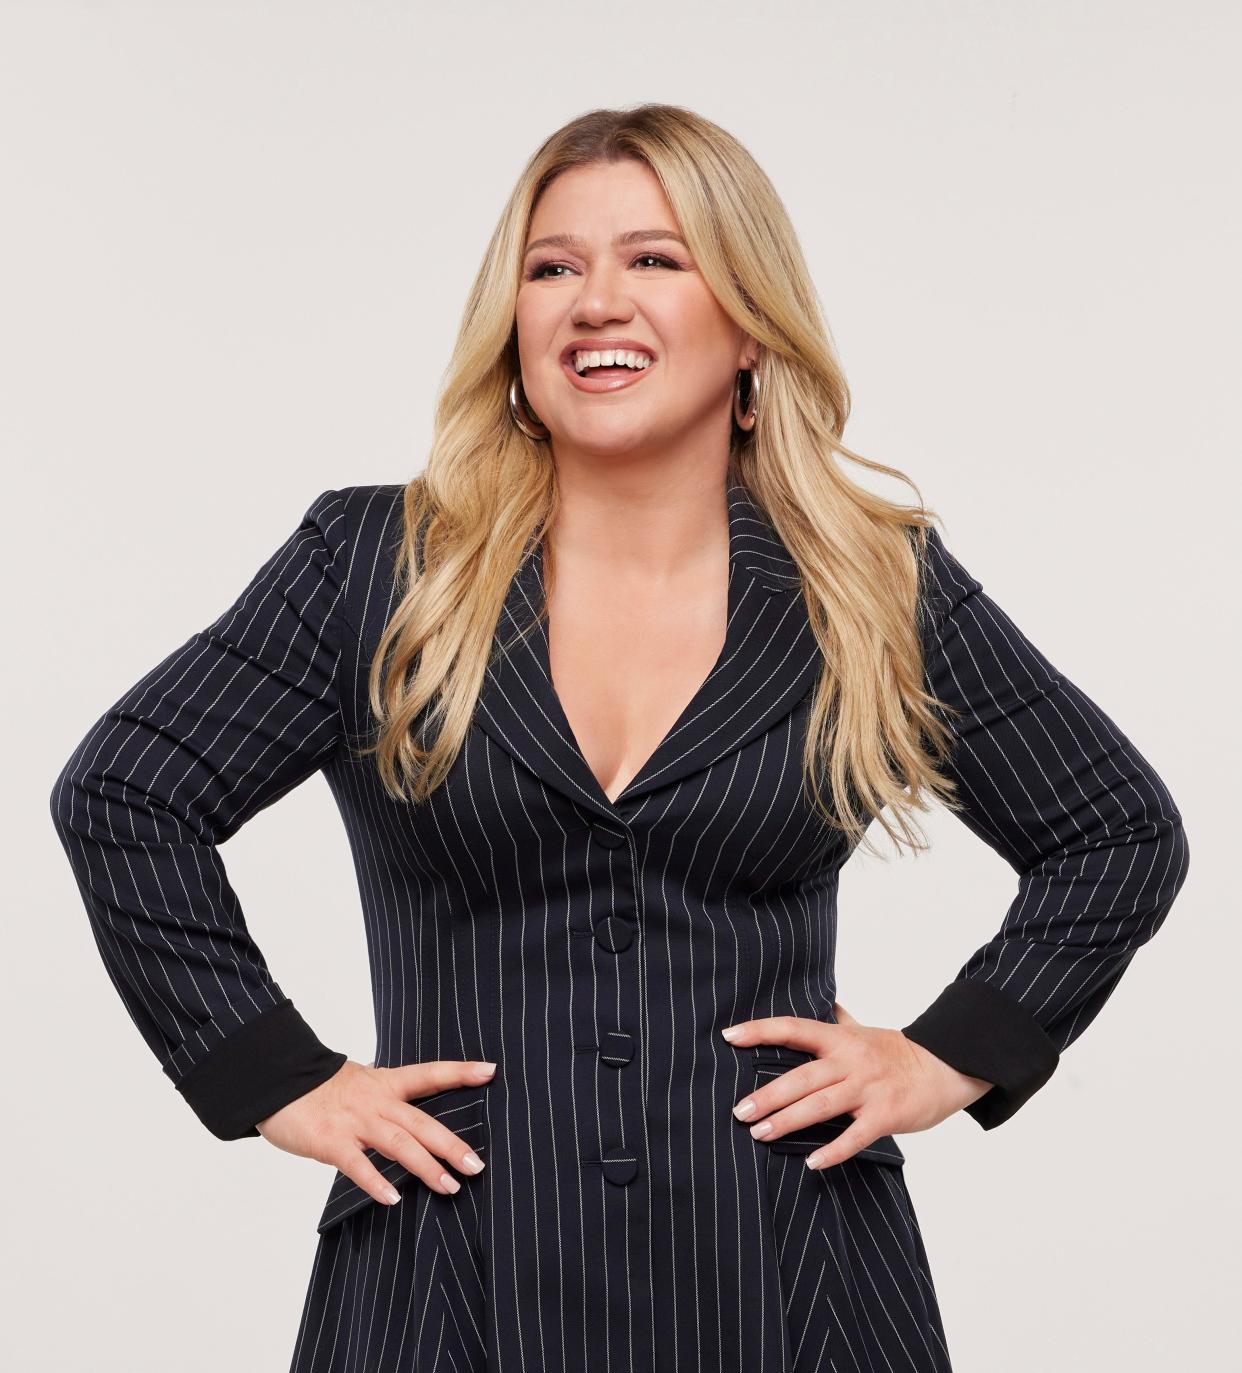 "She's naturally curious and she's authentic," executive producer Alex Duda says of Kelly Clarkson. "That is key to daytime television."